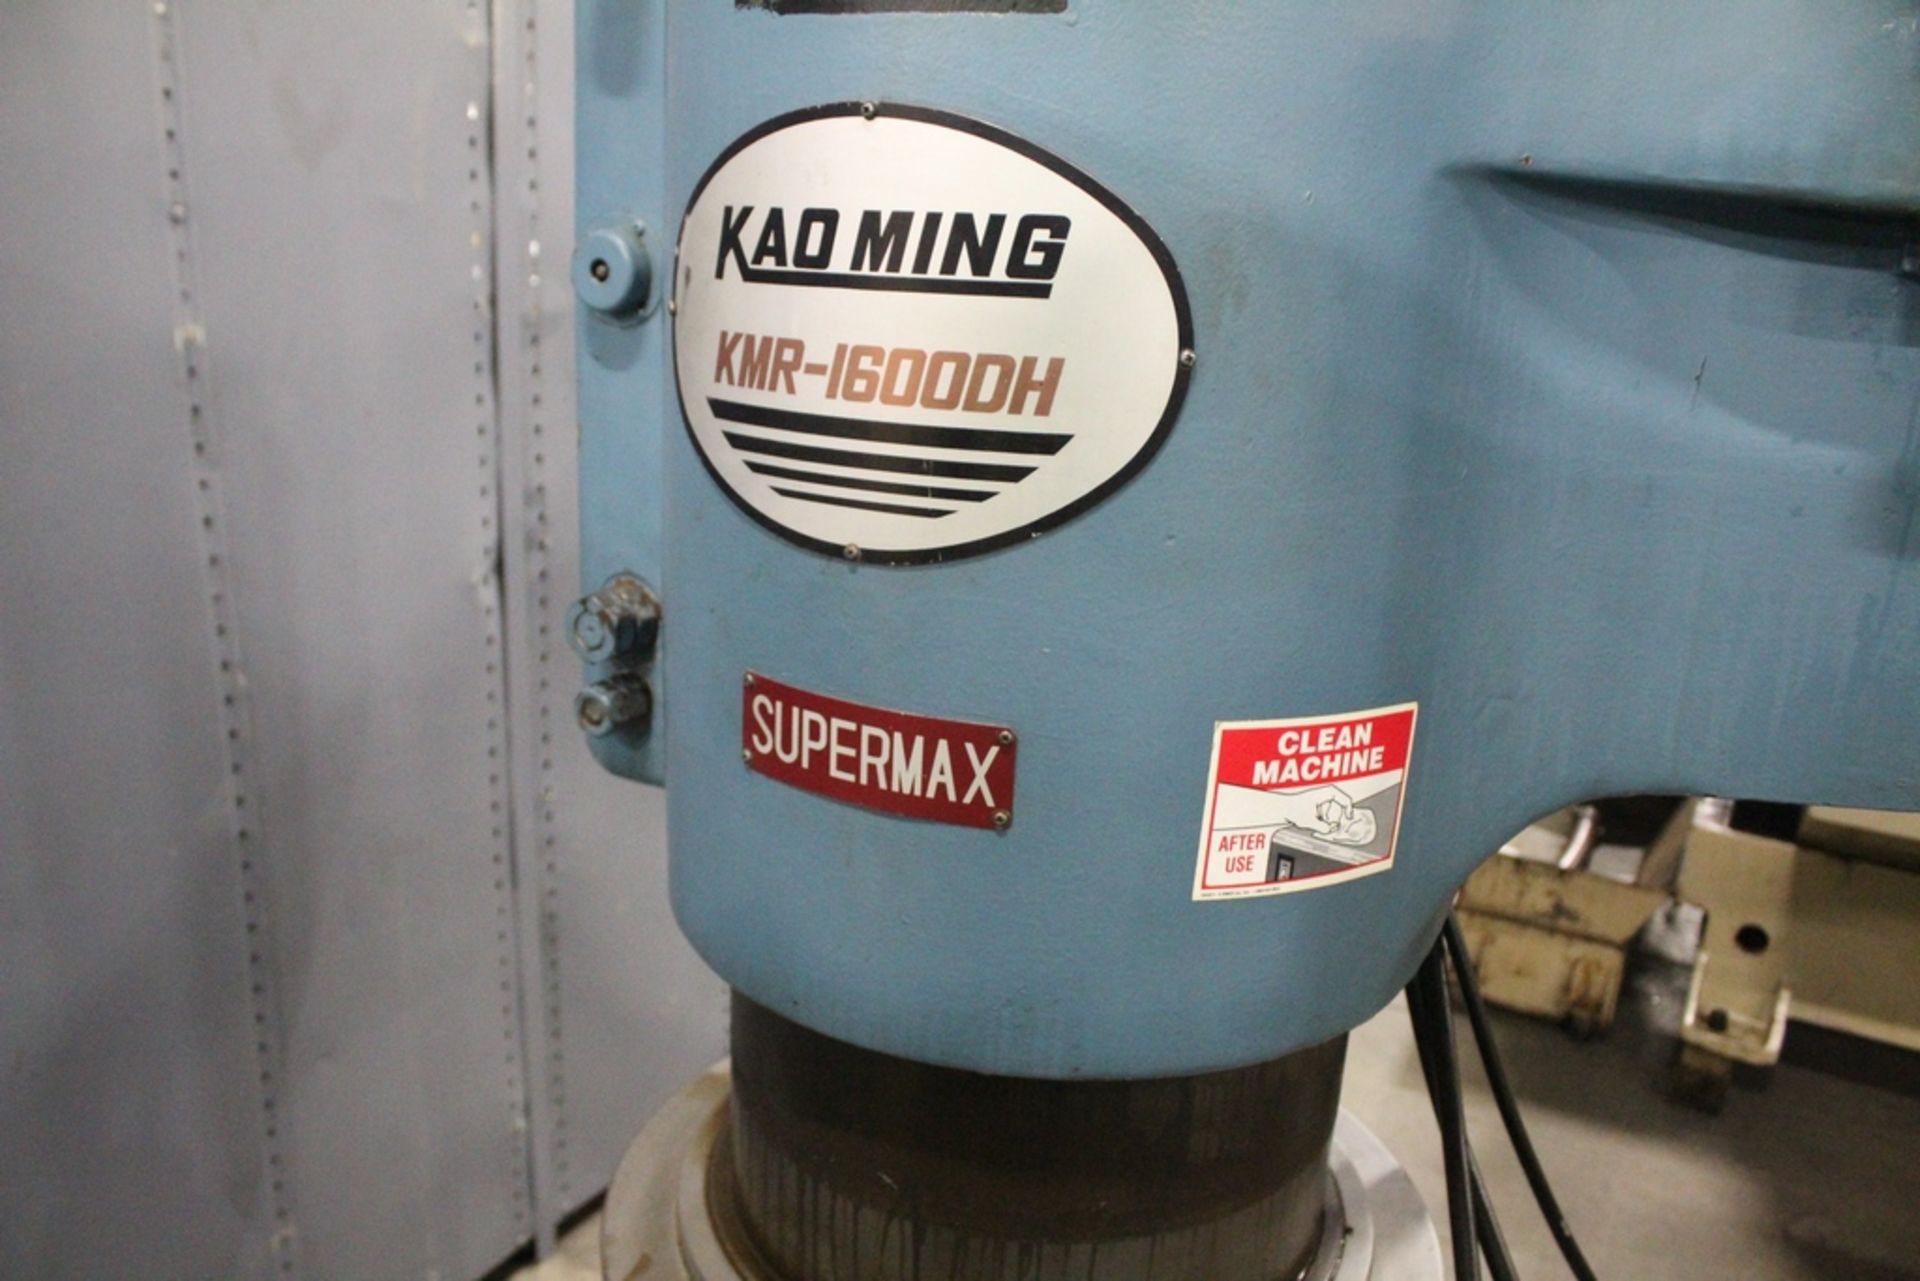 KAO MING MODEL KMR-1600DH SUPERMAX RADIAL ARM DRILL, 5' X 16" COLUMN, S/N 1888 (SHIPPING WEIGHT 10, - Bild 6 aus 6